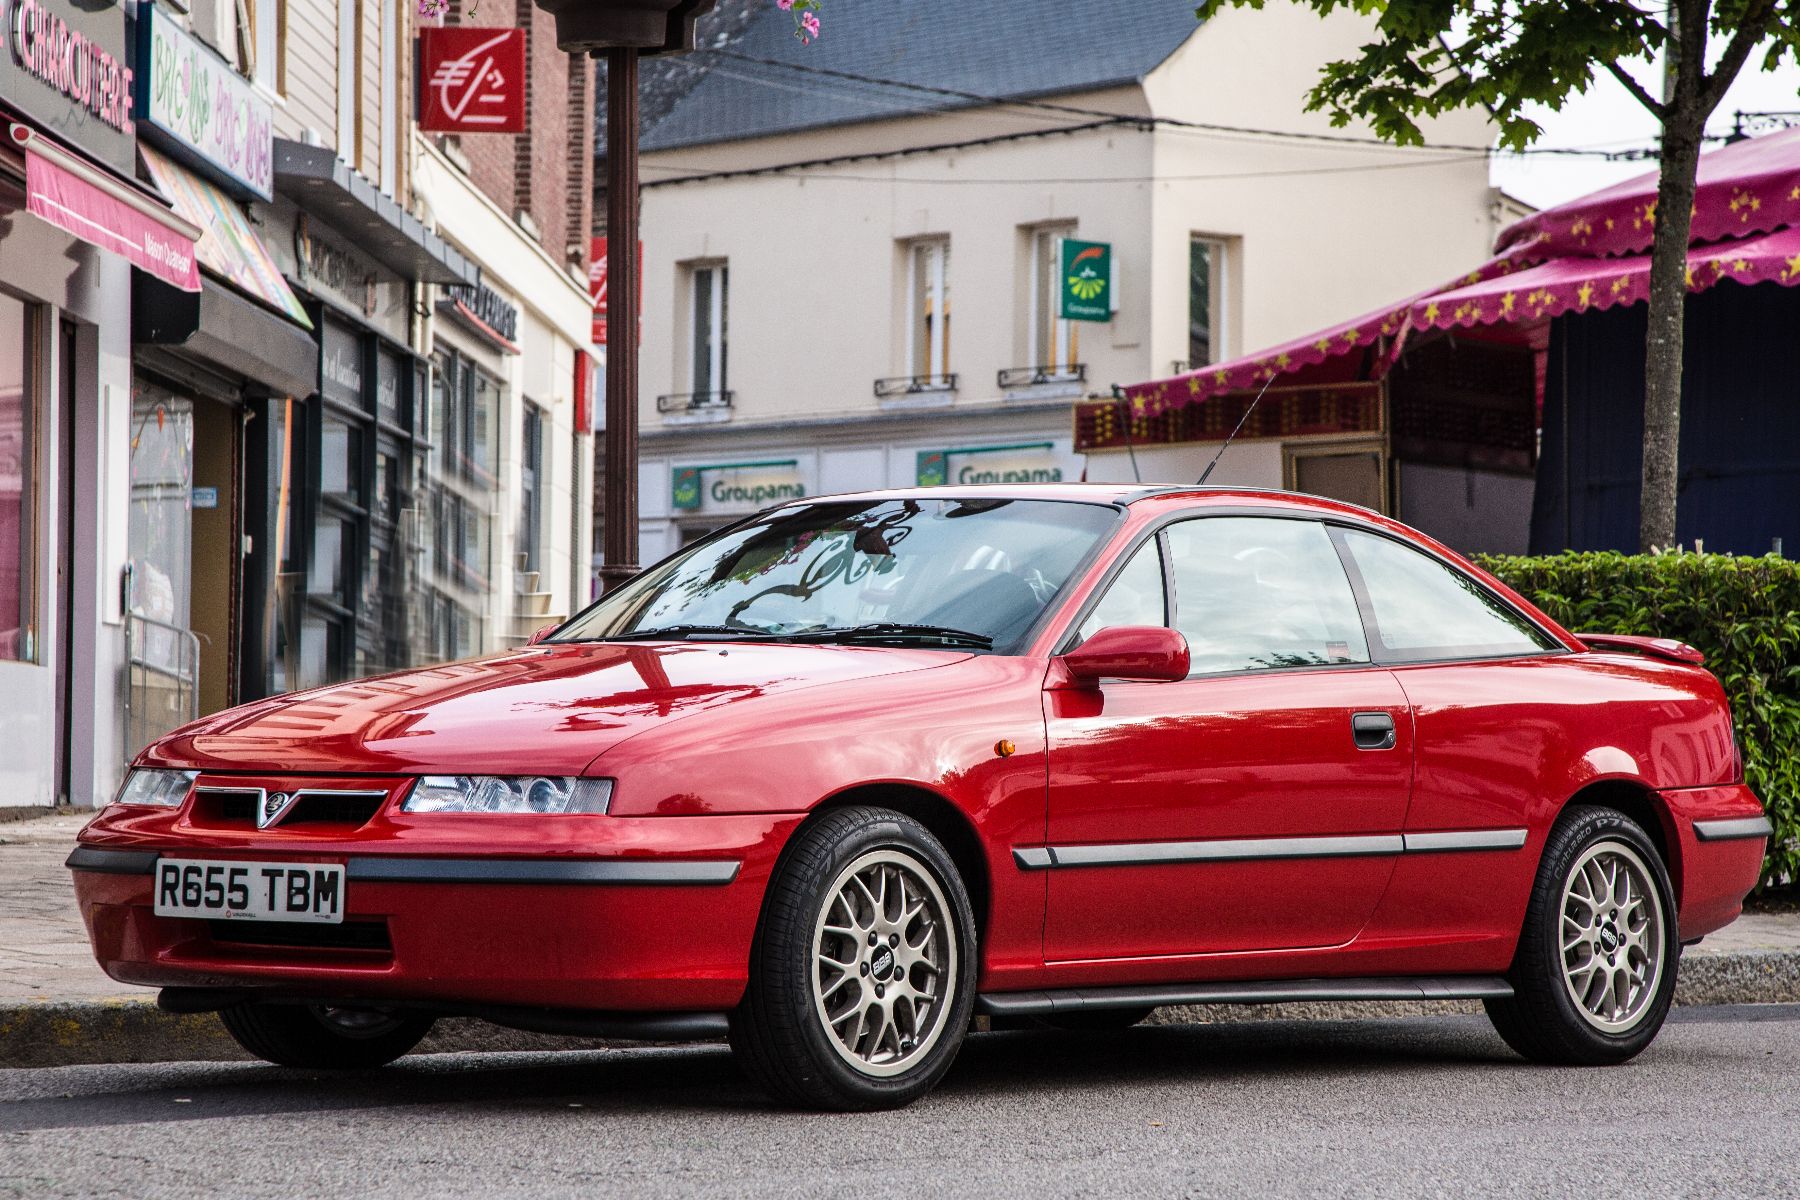 Vauxhall Calibra V6 review a classic coupe that still